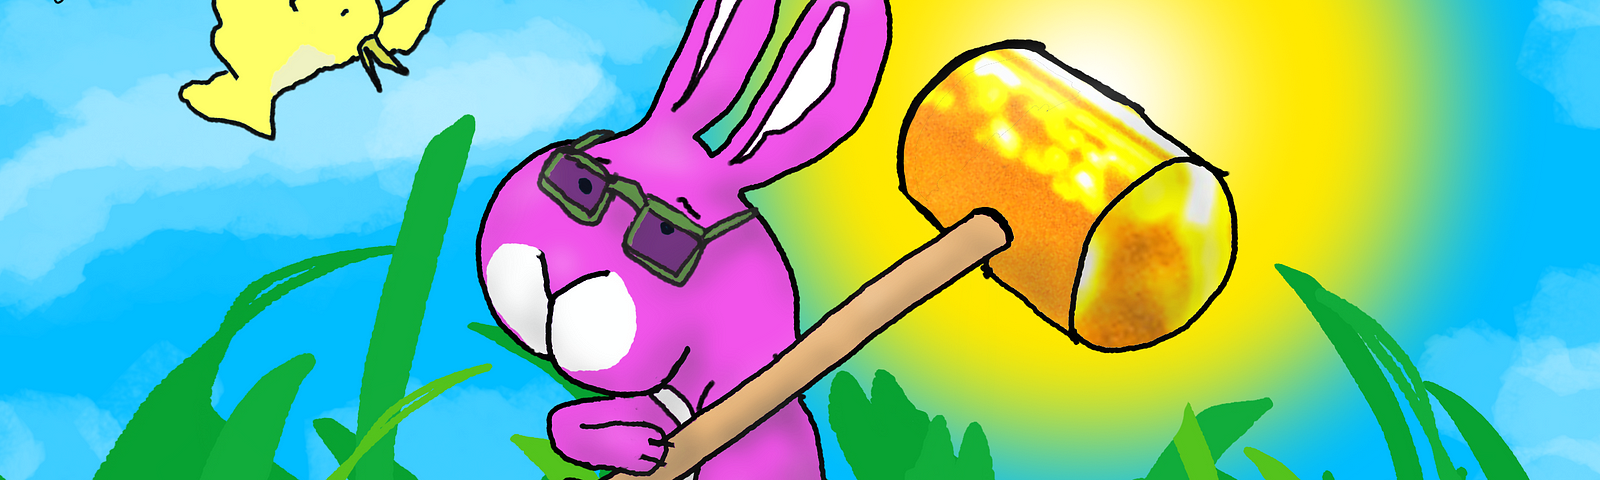 A cartoon of a purple bunny holding a golden mallet on its shoulder. He is standing in a sunny field of green grass and is surrounded by three yellow birds. And, yes, I reworked the drawing from my ‘Rubber Mallet’ poem the other day, so sue me. Art by Doodleslice 2024.